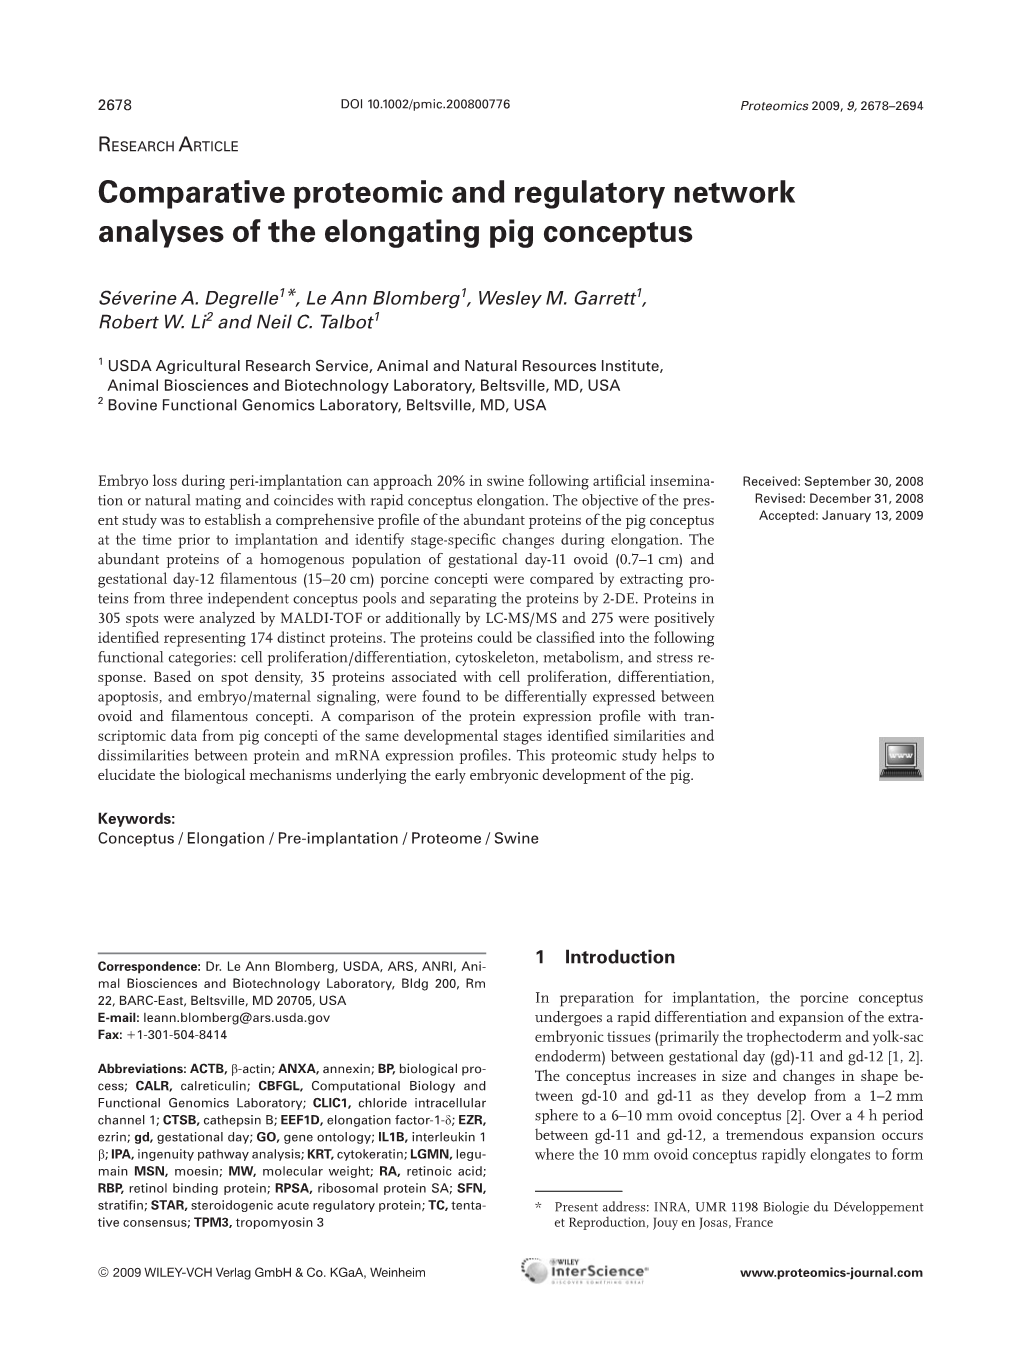 Comparative Proteomic and Regulatory Network Analyses of the Elongating Pig Conceptus